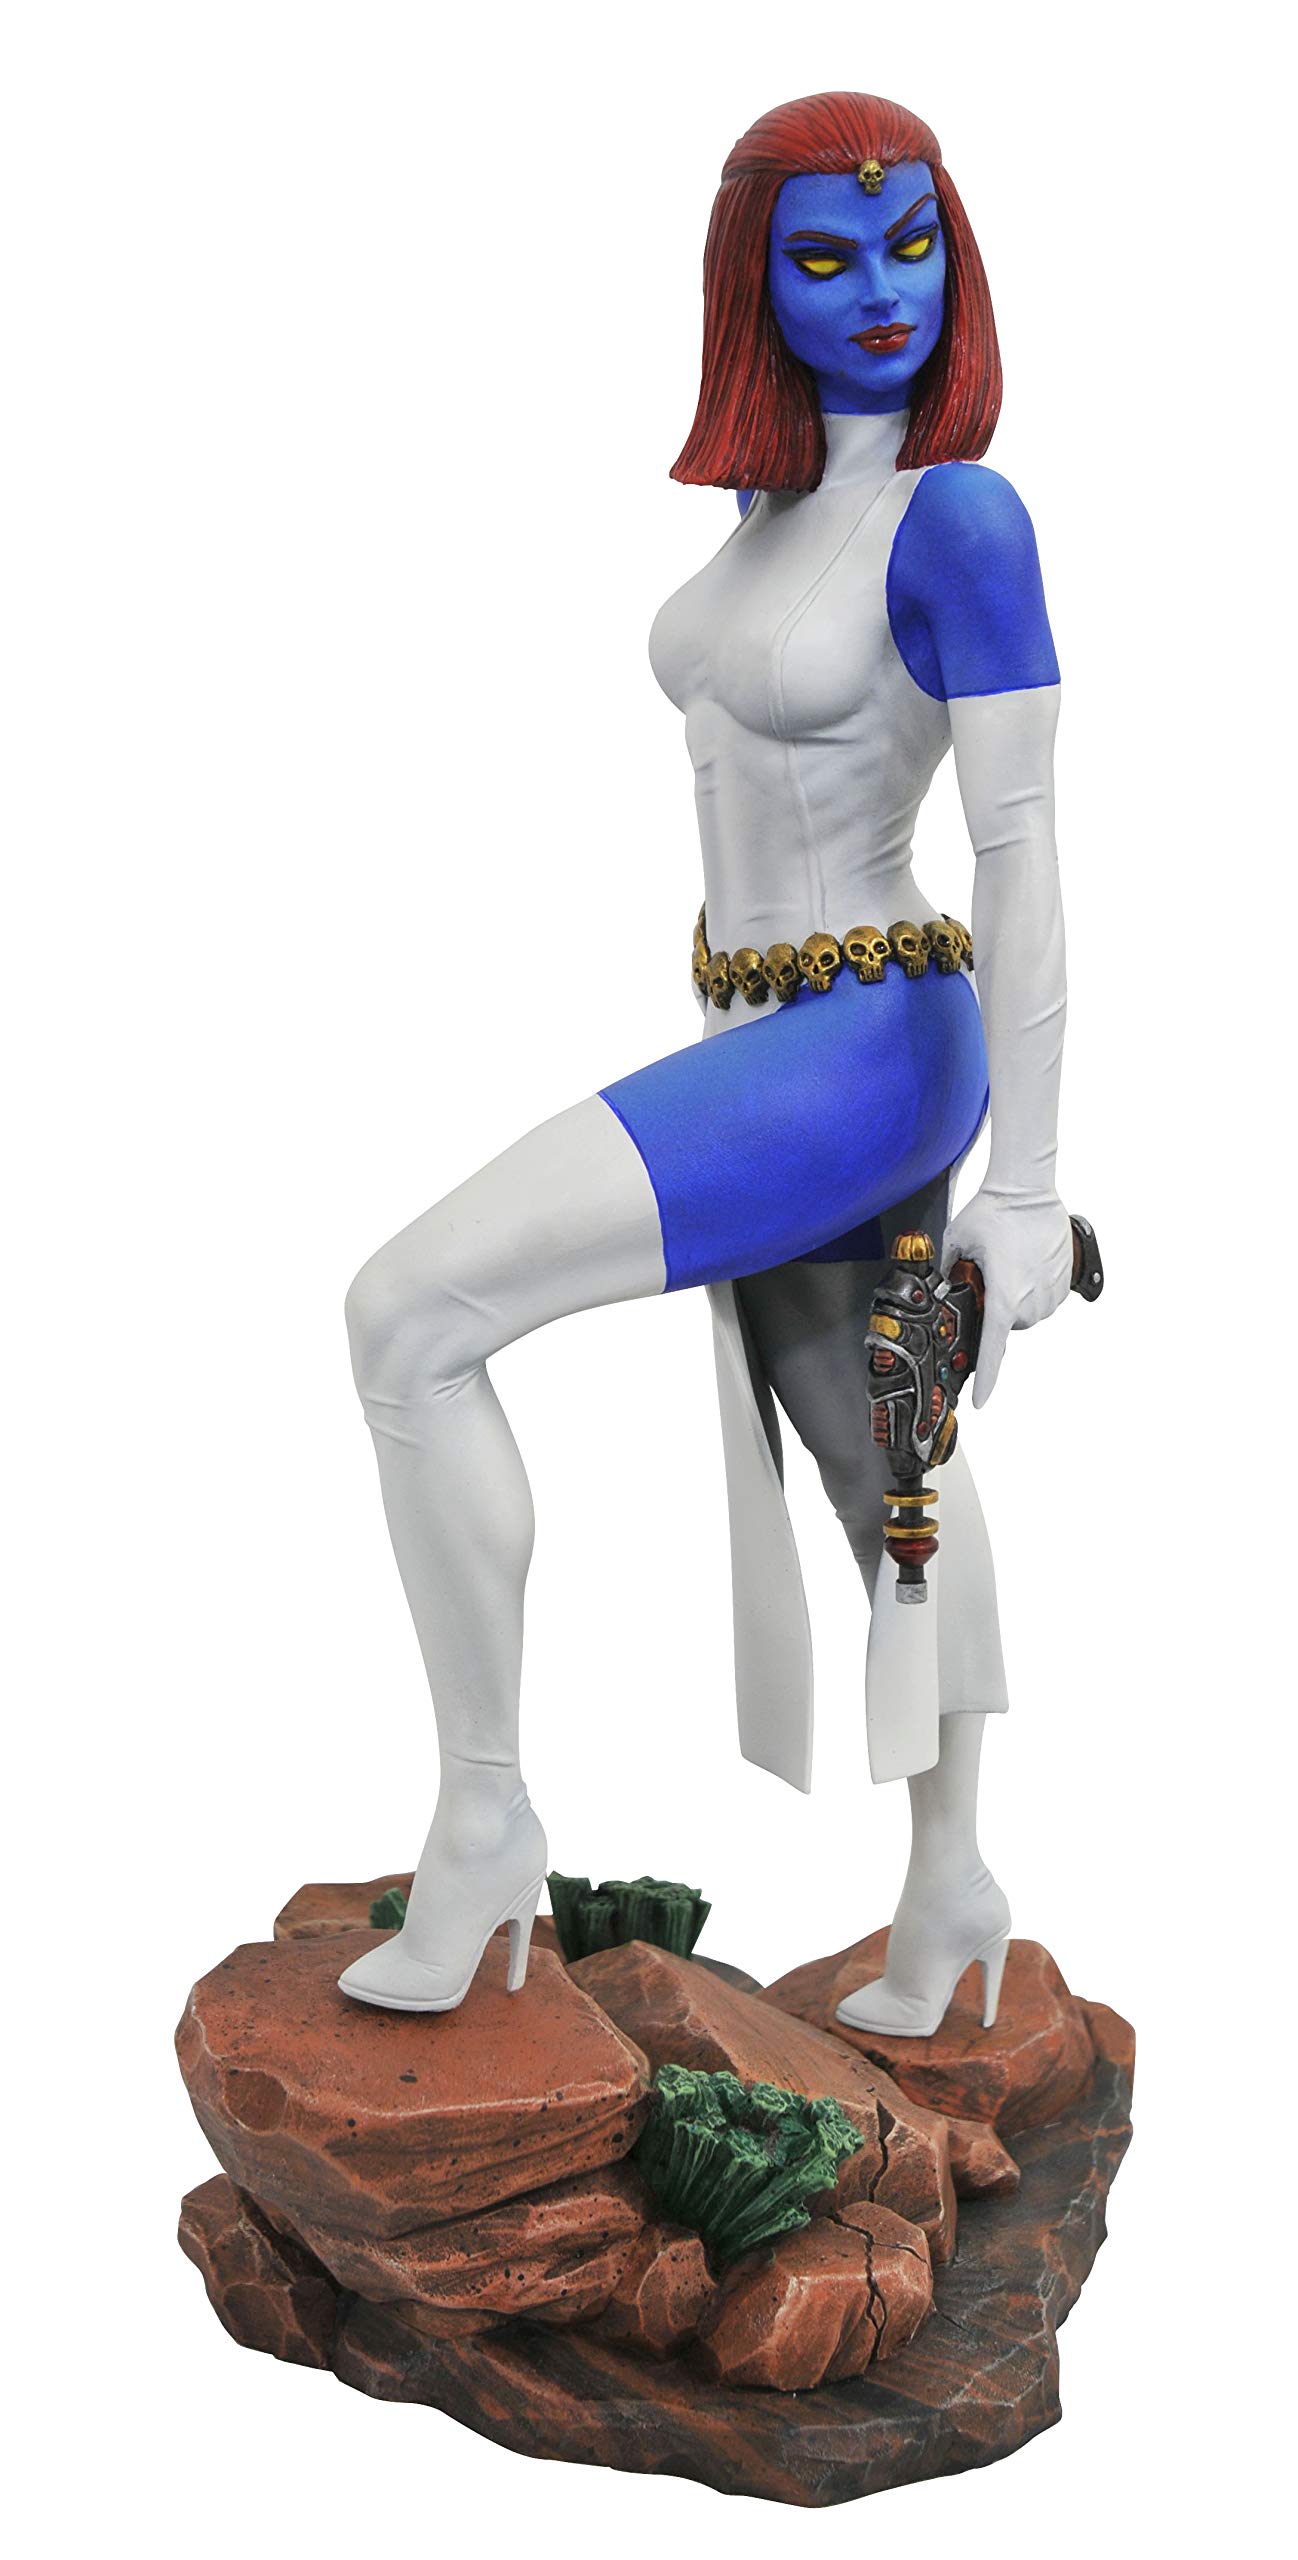 DIAMOND SELECT TOYS Marvel Premier Collection: Mystique Resin Statue, Multicolor, 11 inches